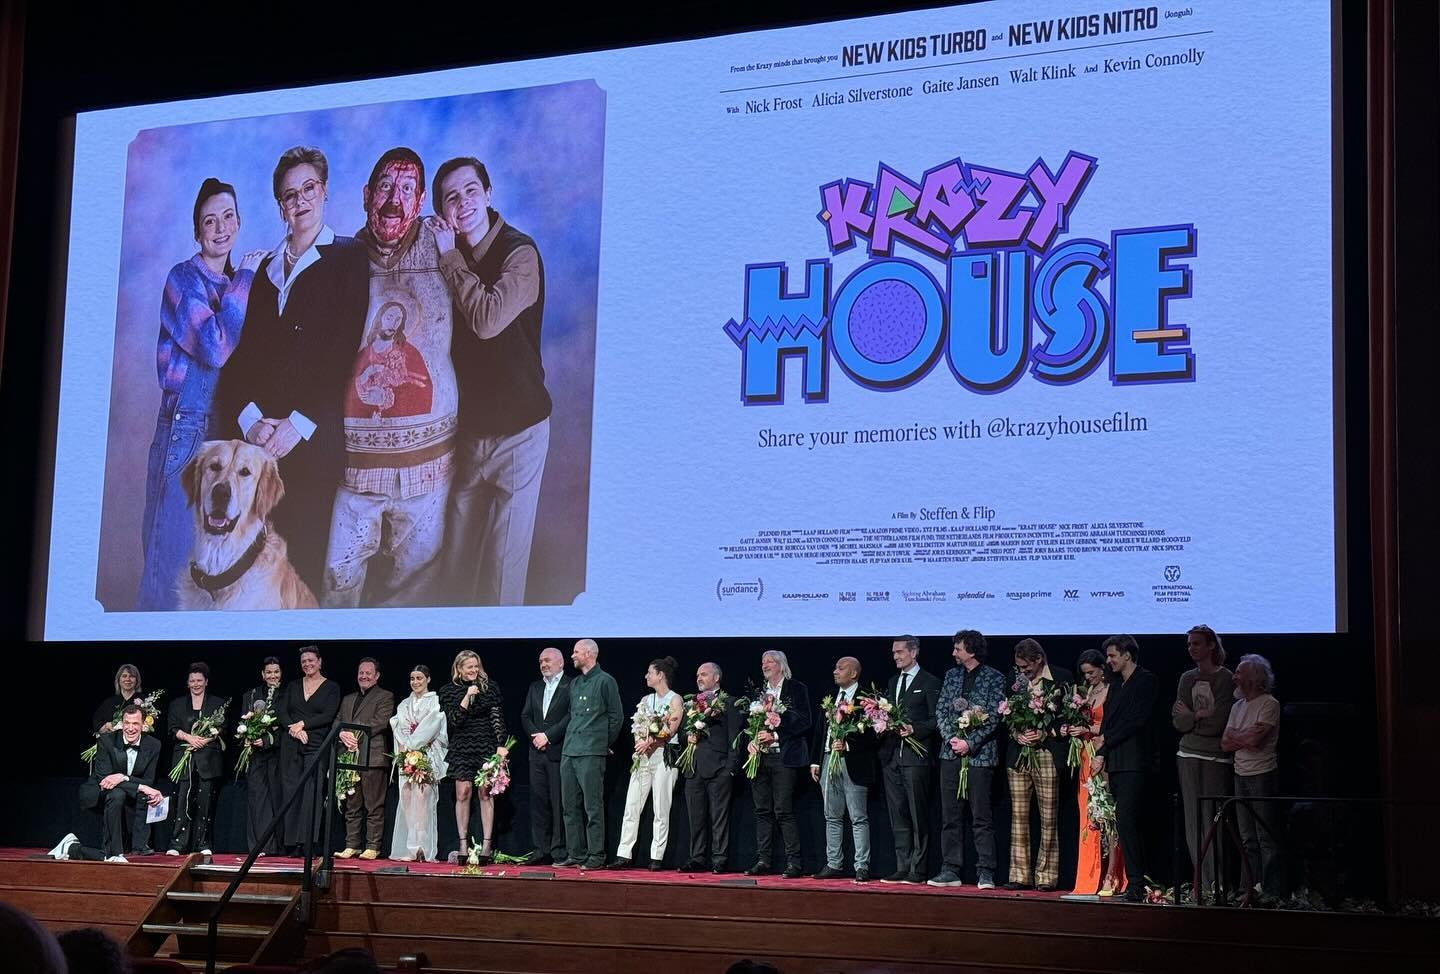 &ldquo;Krazy House&rdquo; hits Dutch cinemas on May 16th after its premiere at @sundanceorg. We contributed to this film as VFX-supervisors and -artists. &nbsp;
&nbsp;
Starring Nick Frost and Alicia Silverstone, this film is a dark parody of 80s and 